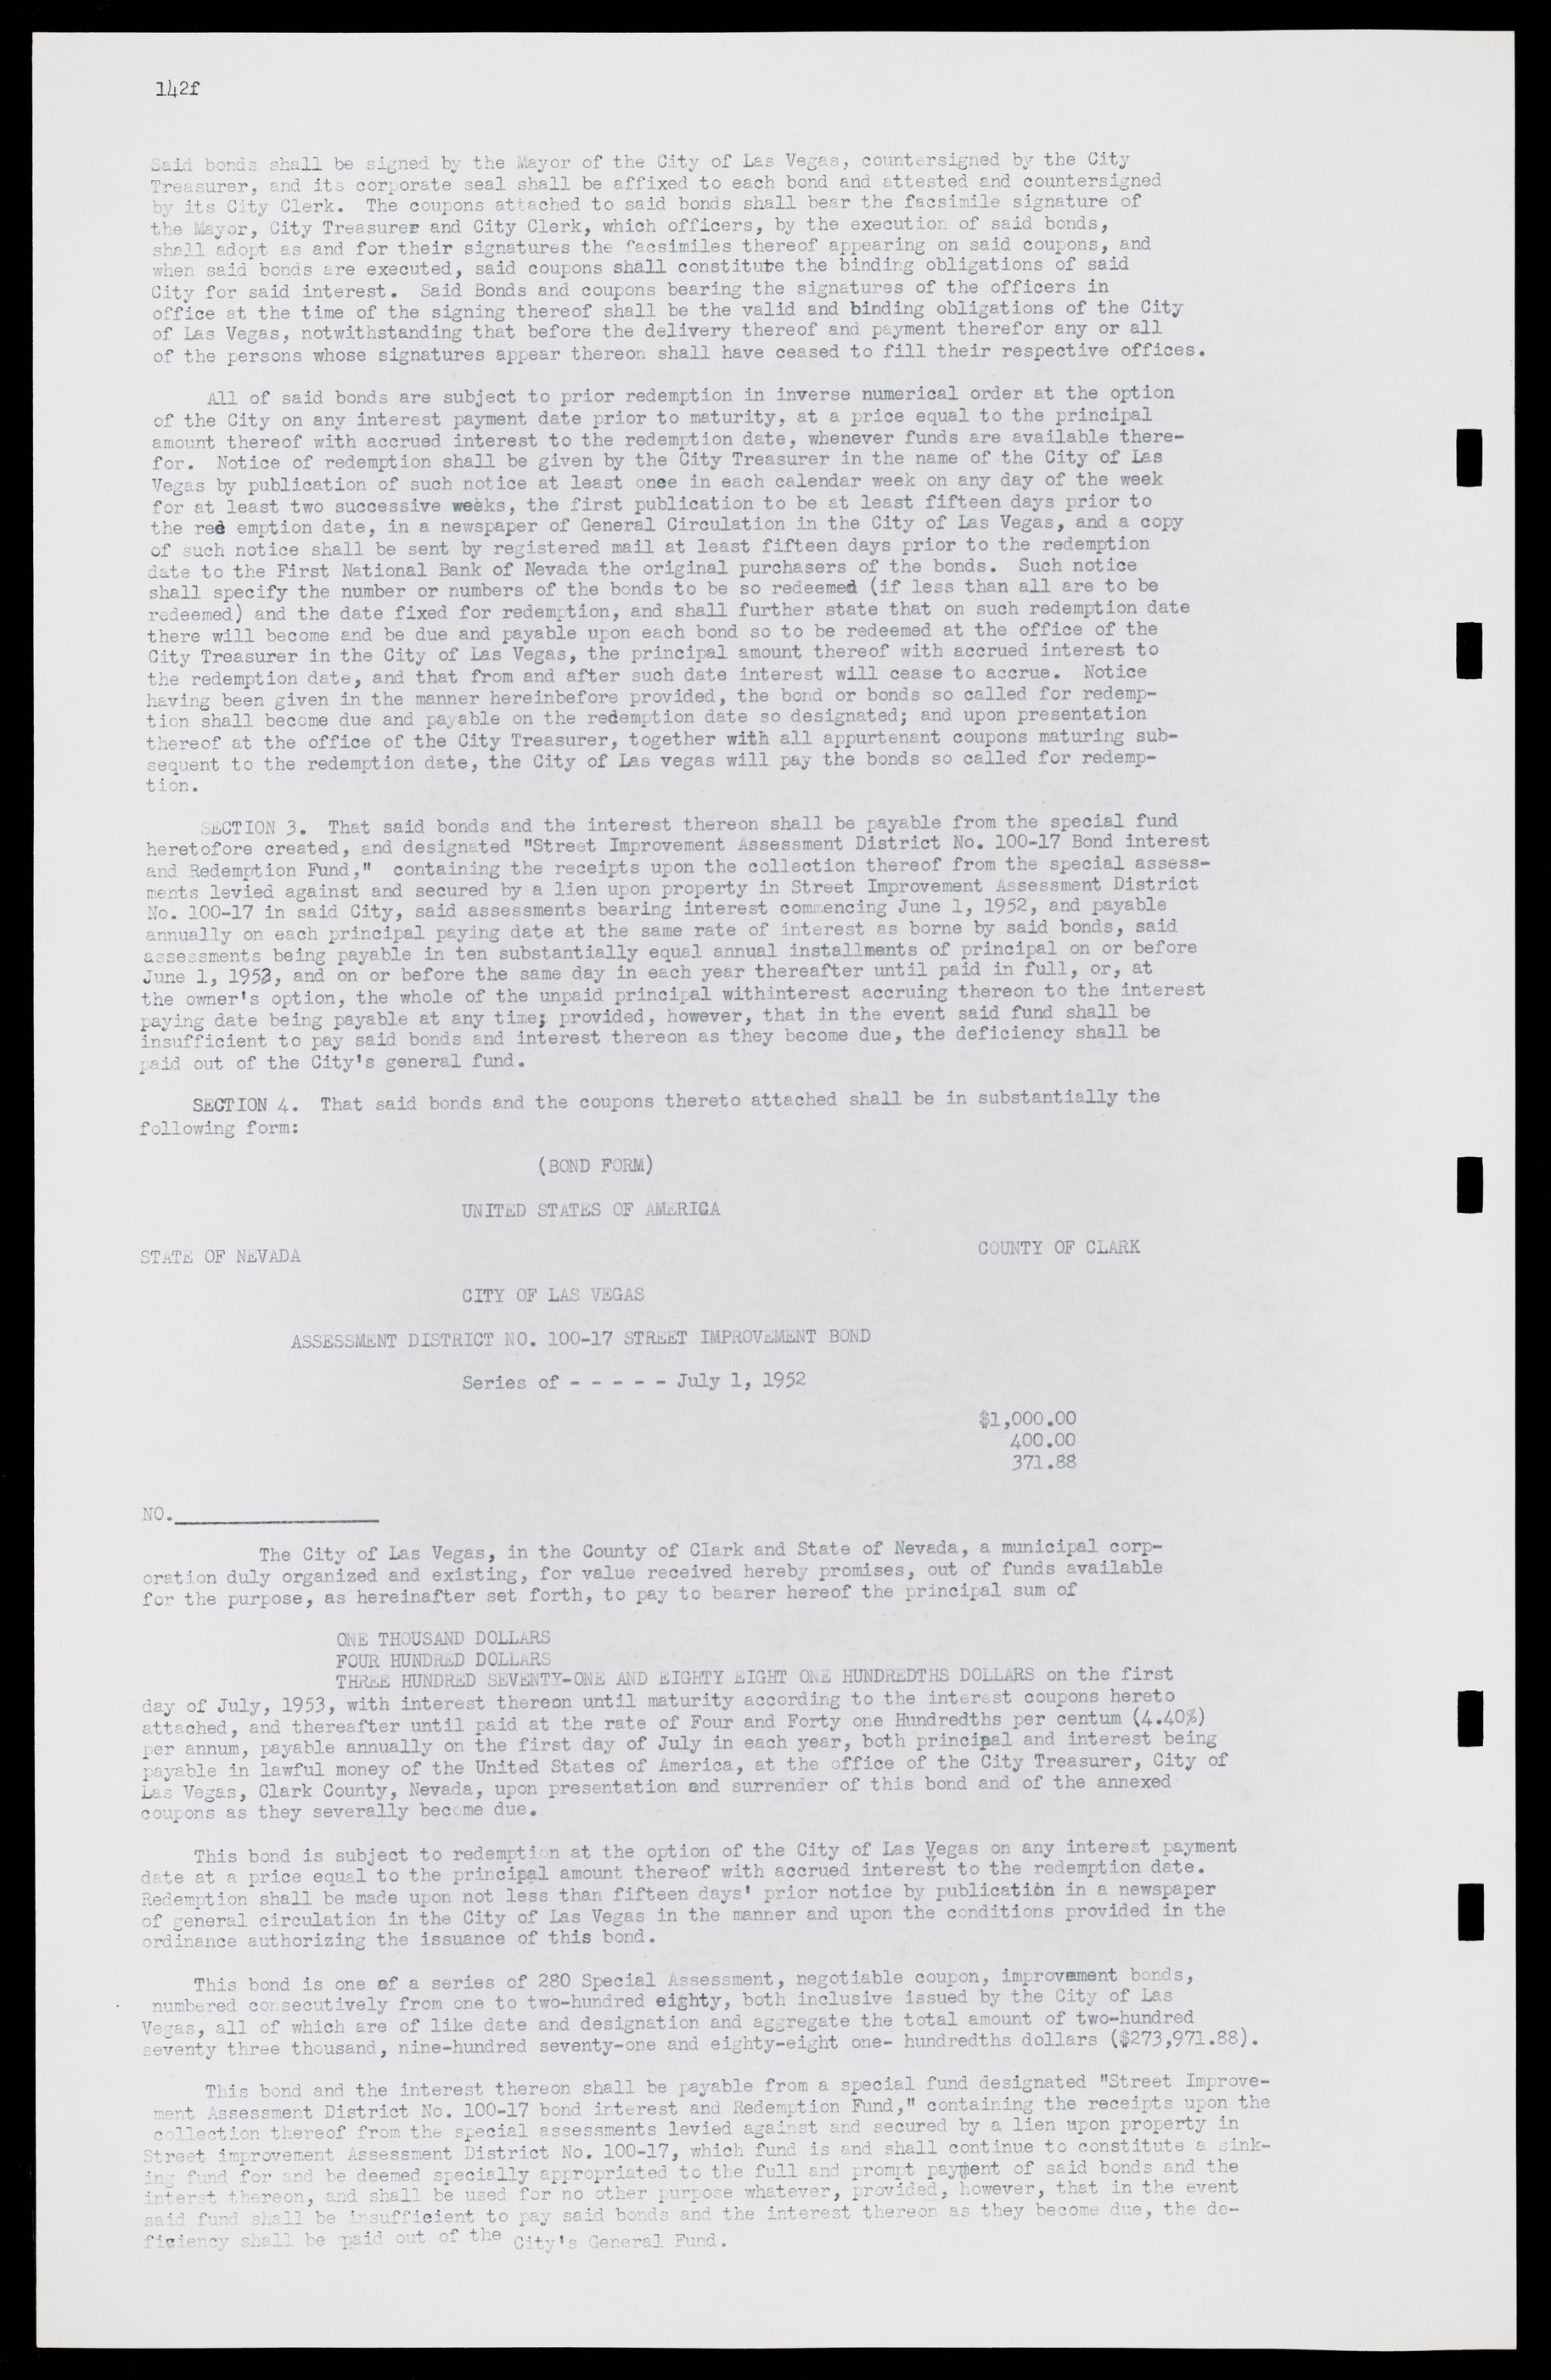 Las Vegas City Commission Minutes, May 26, 1952 to February 17, 1954, lvc000008-154